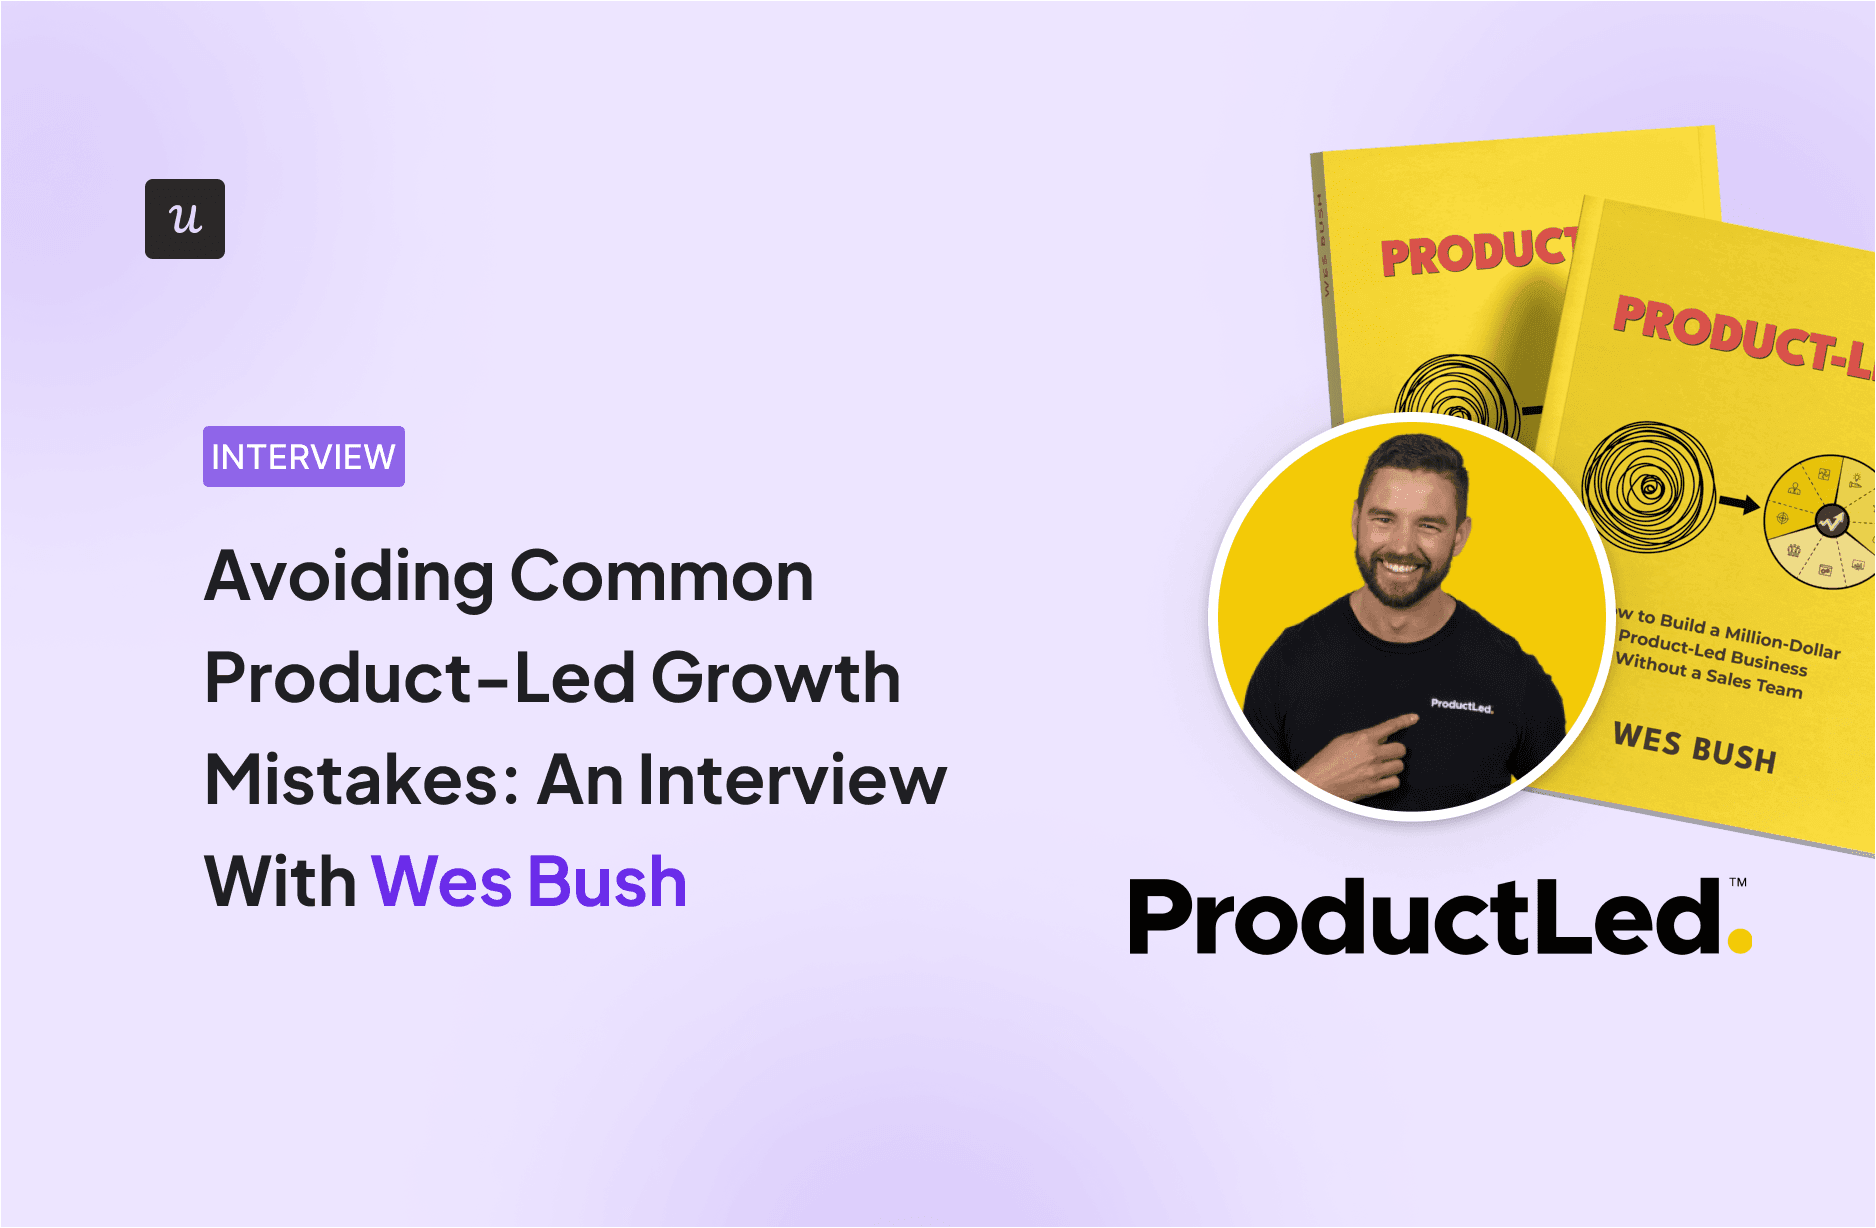 Avoiding Common Product-Led Growth Mistakes: An Interview With Wes Bush cover